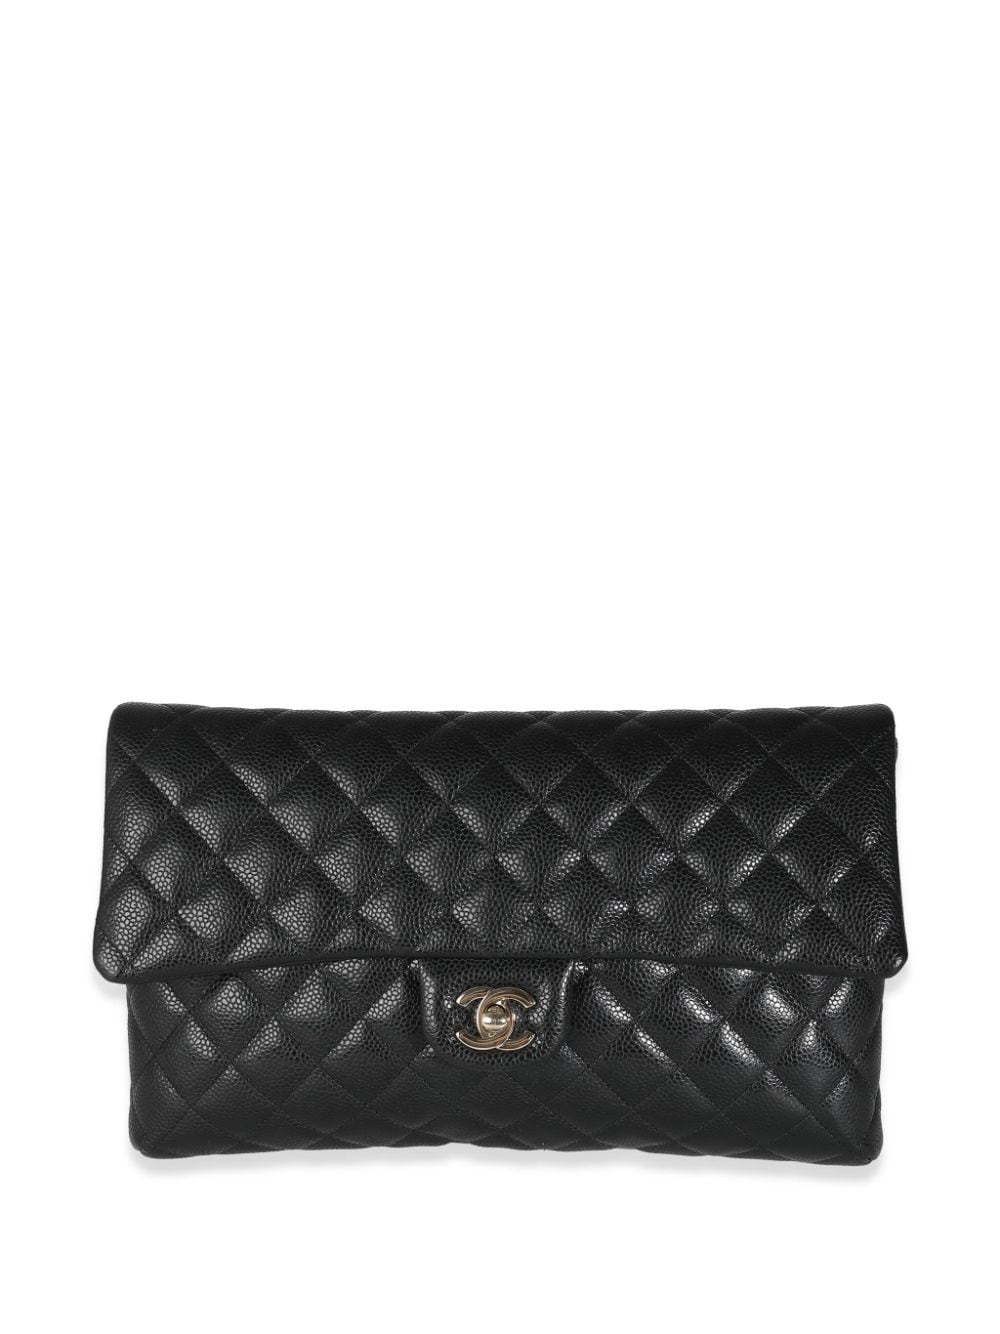 Pre-owned Chanel 2018 Timeless Flap Clutch Bag In Black